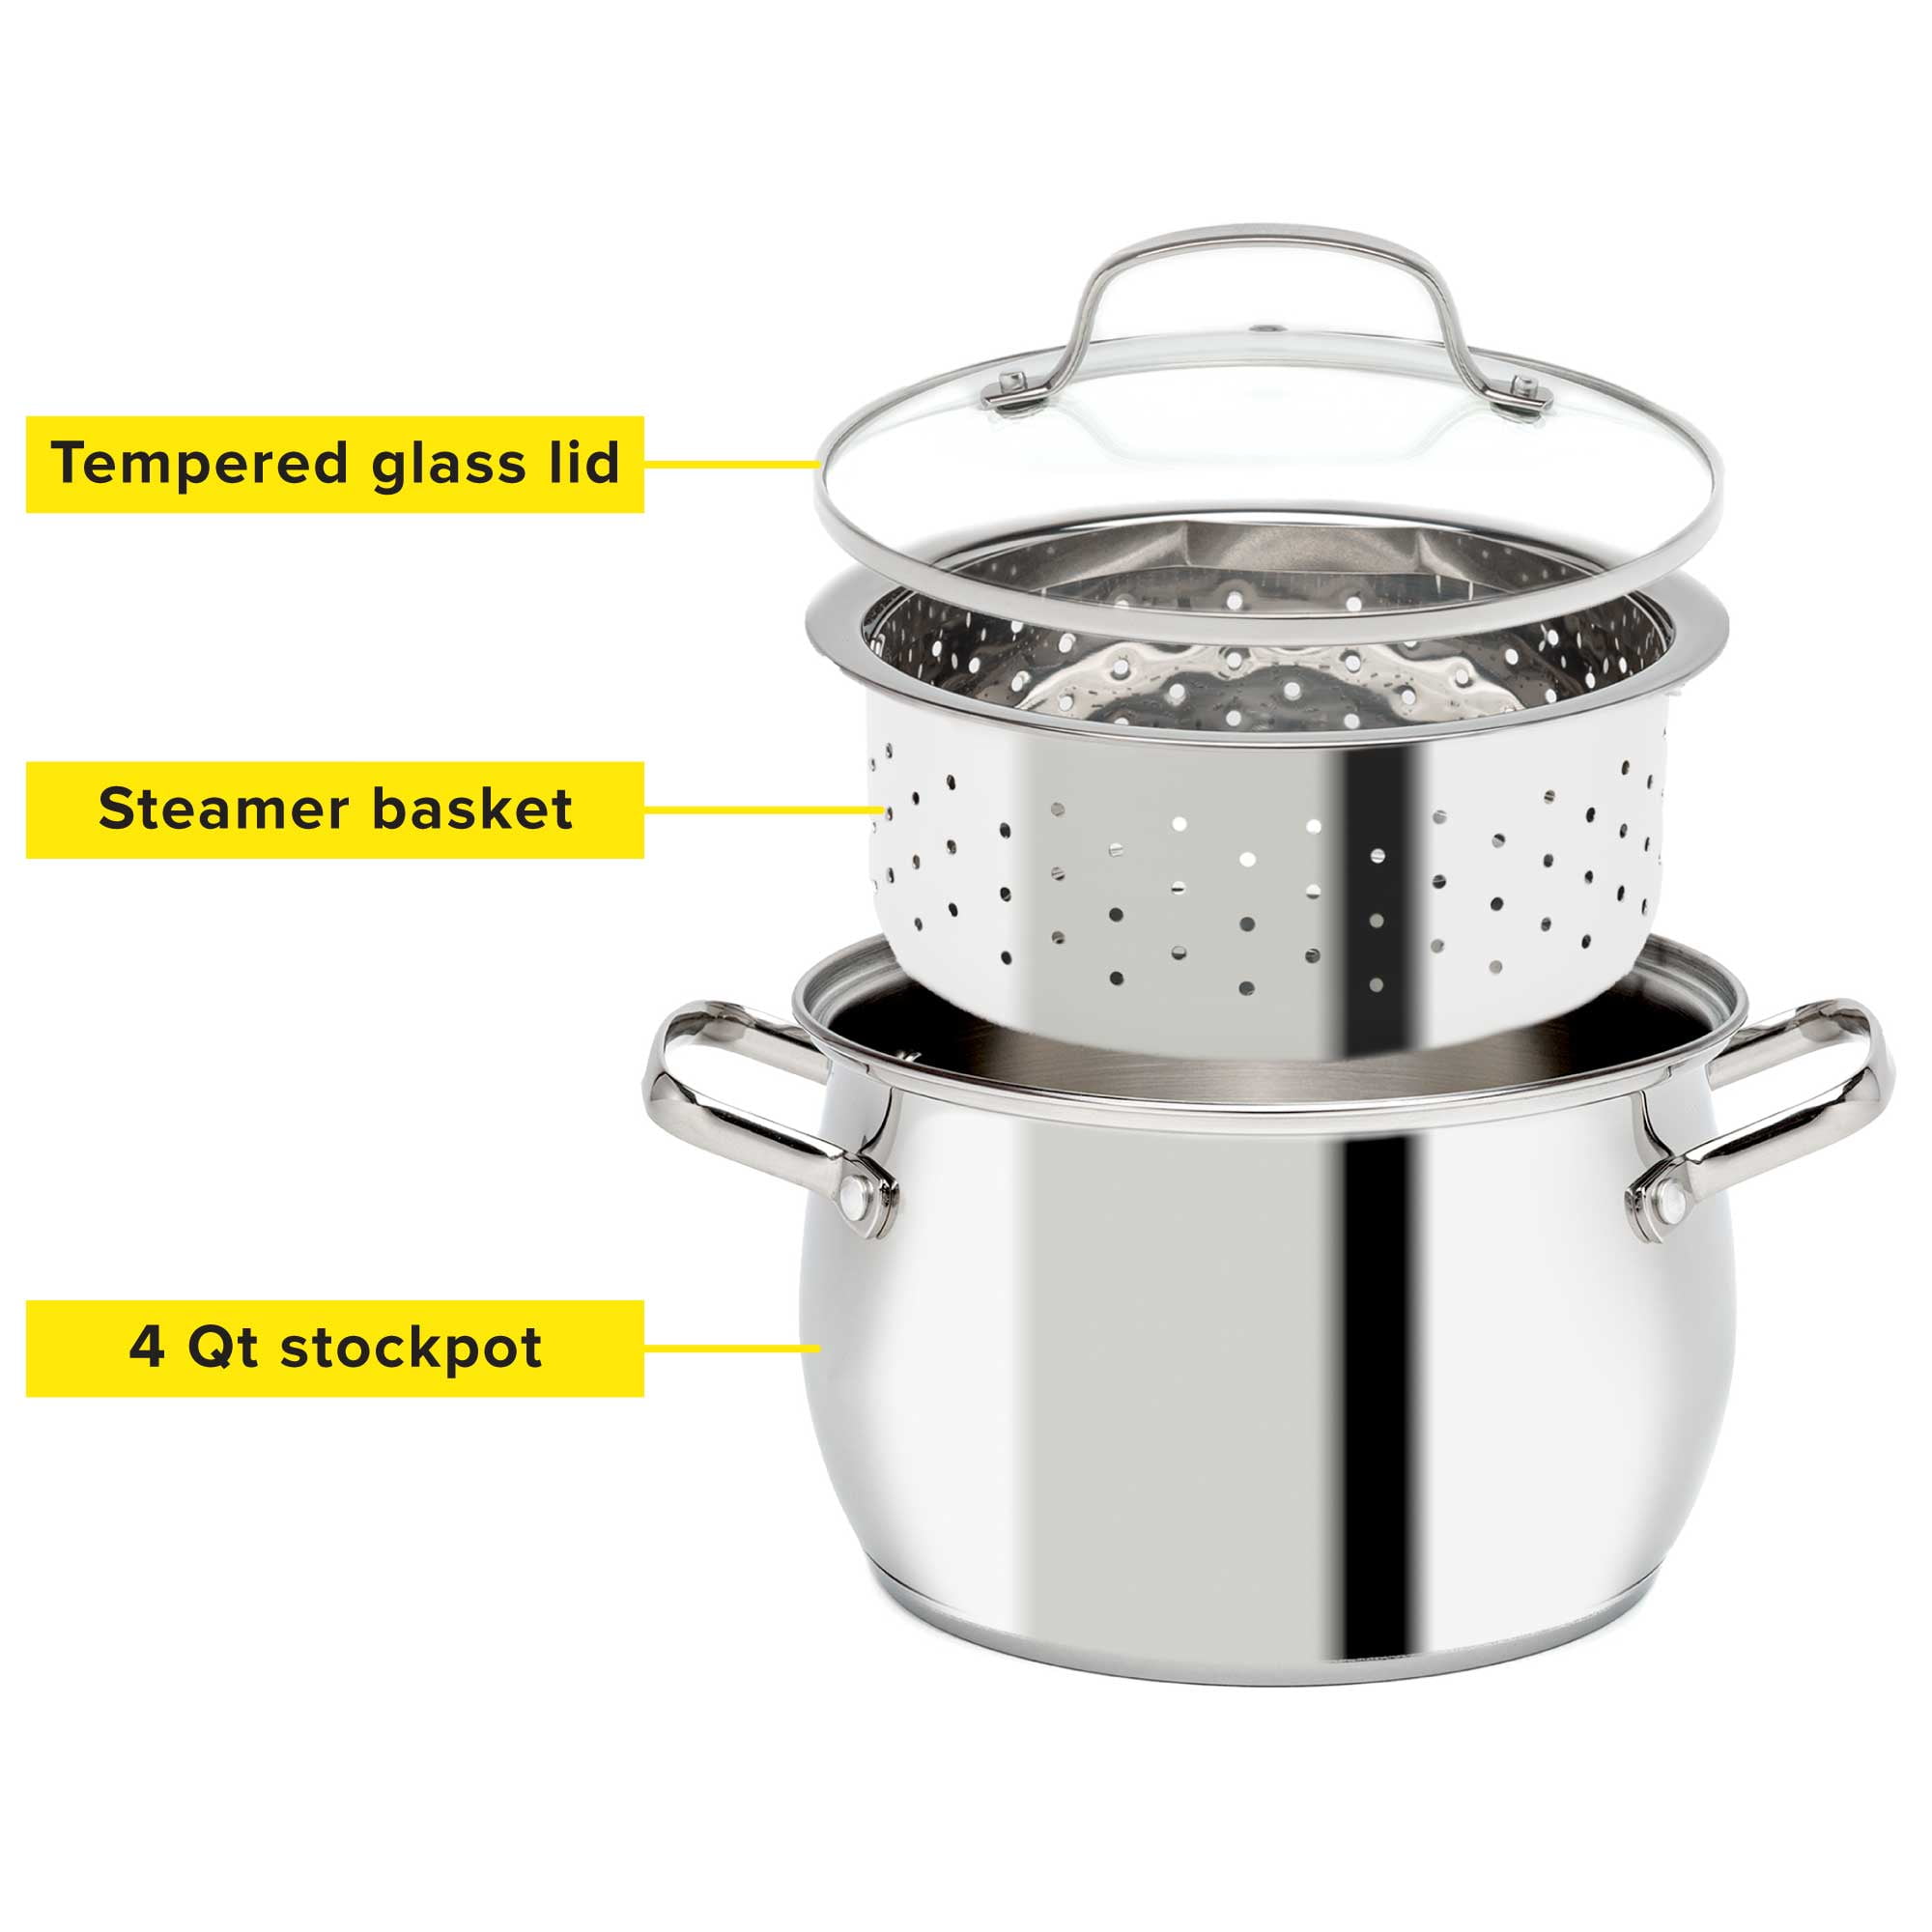 Tasty Stainless Steel Multi-Pot with Glass Lid, 4 Quarts 